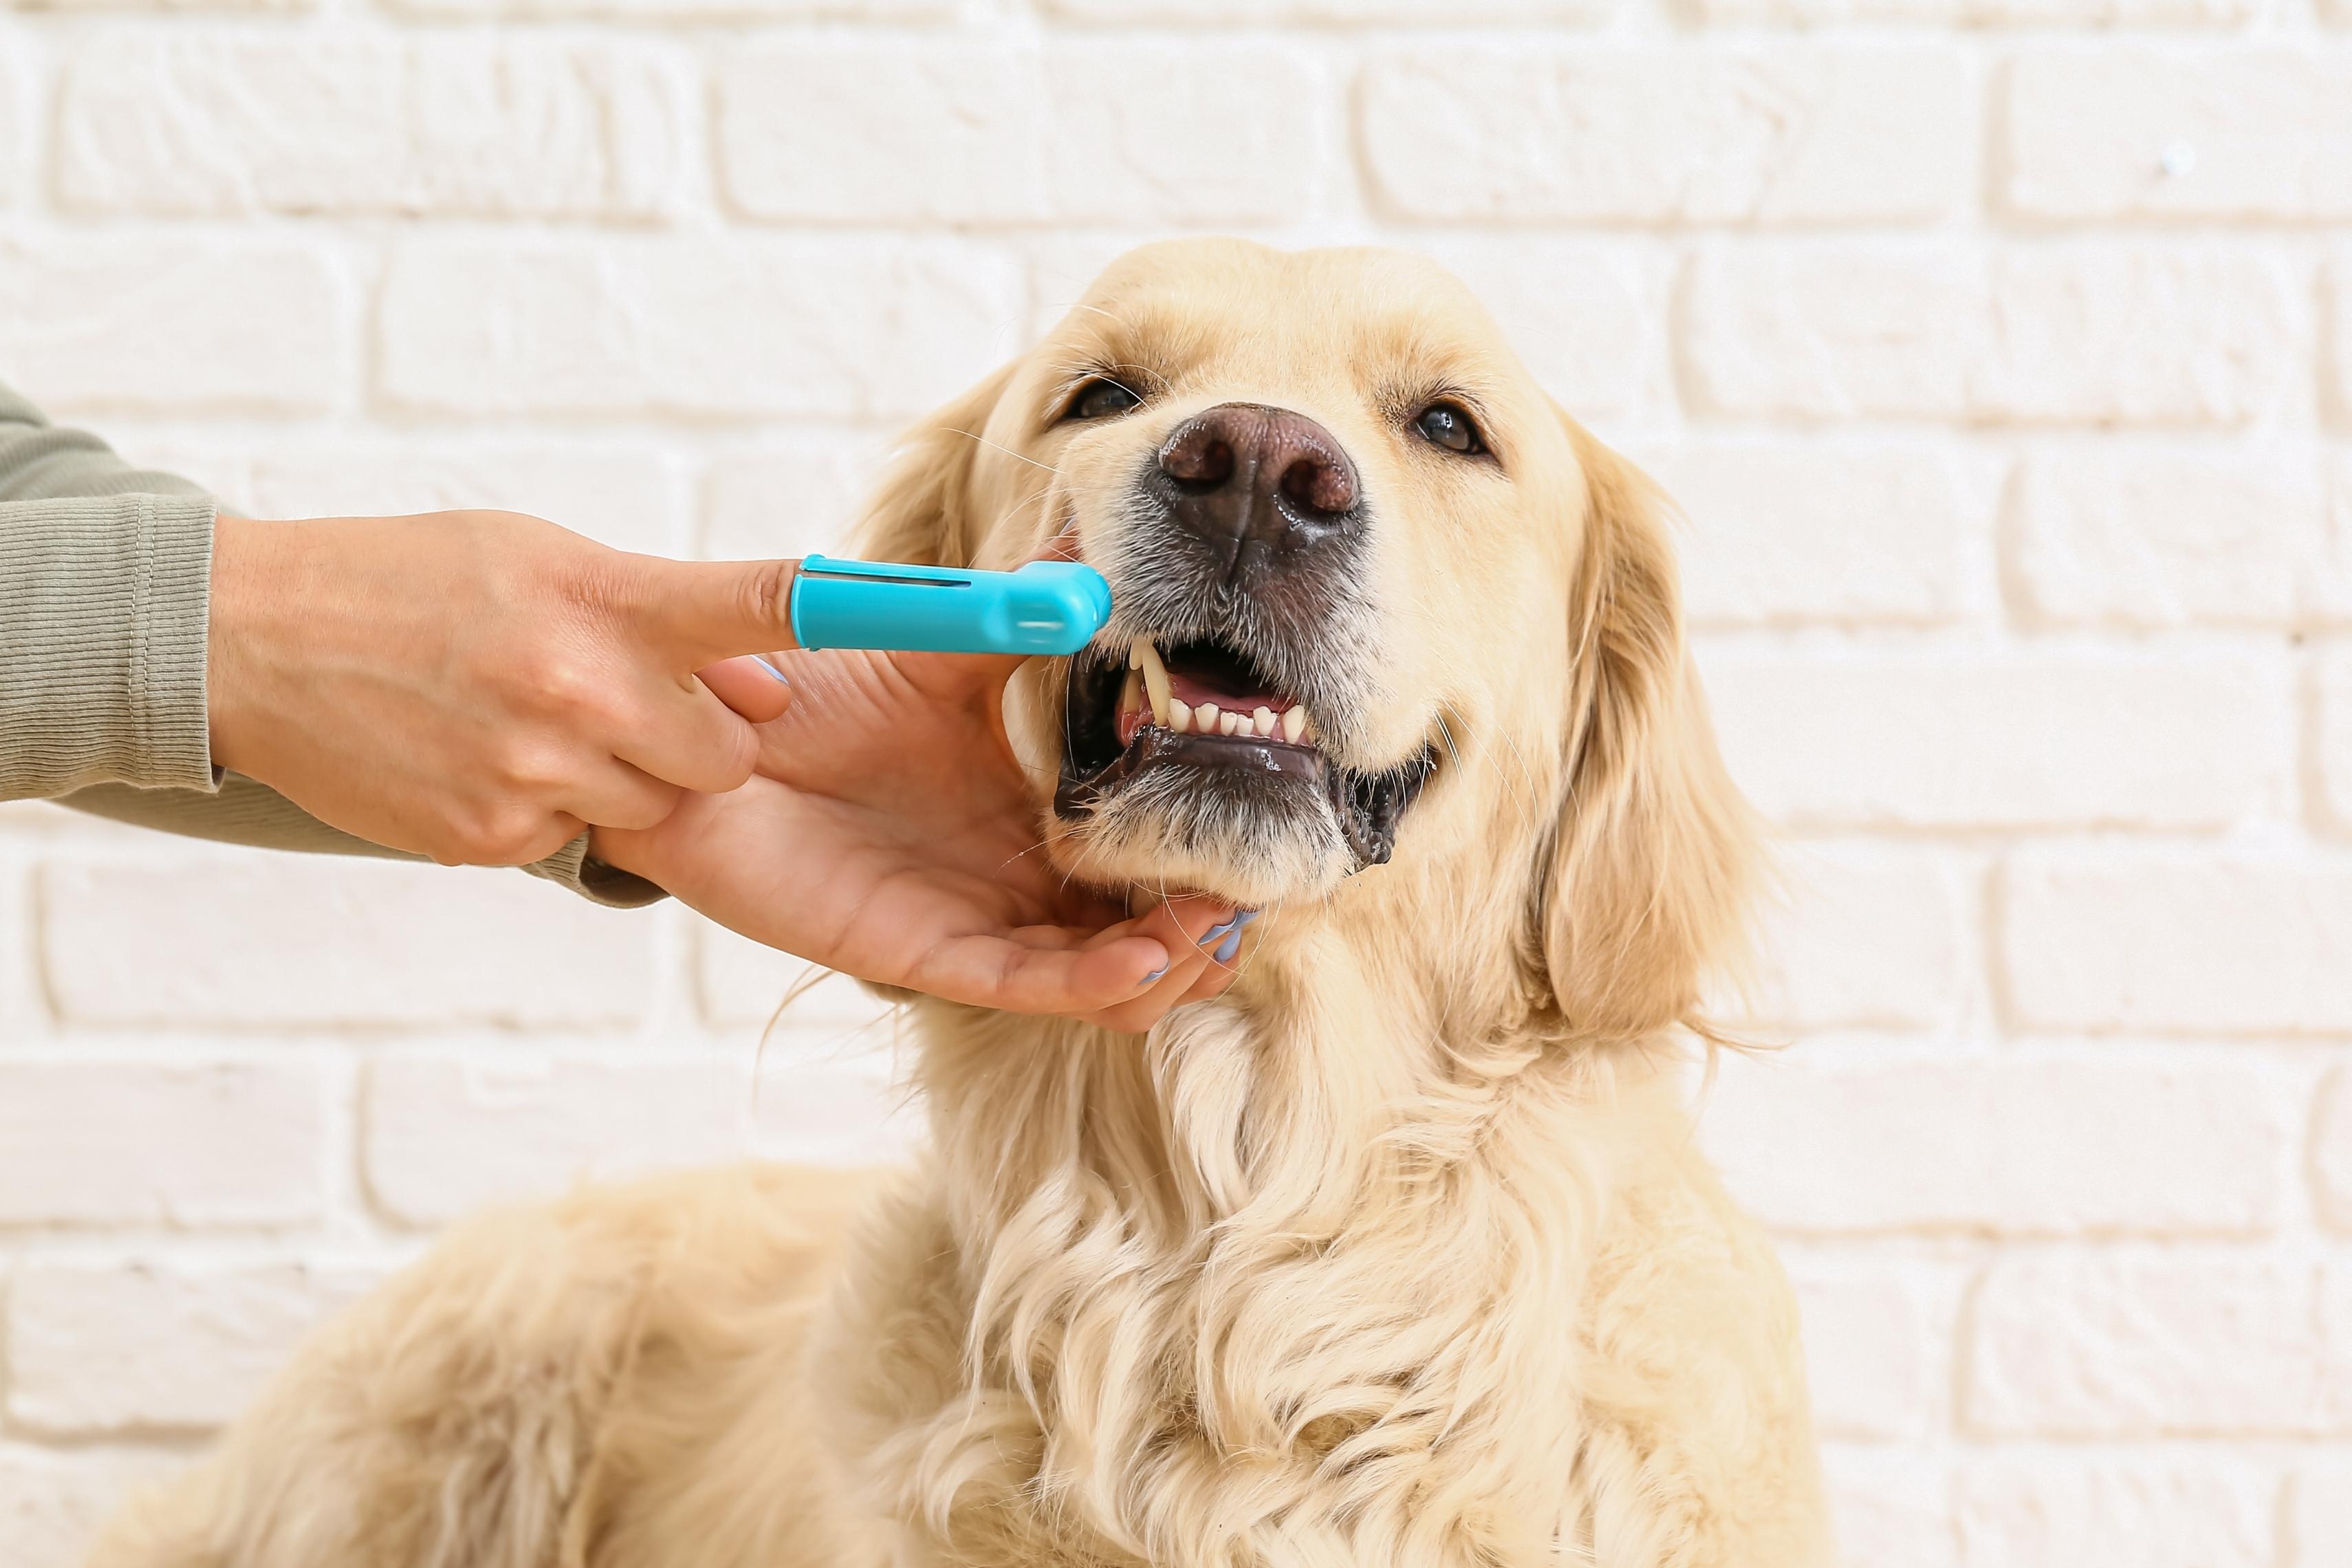 Tips to Keep Your Dog's Teeth Clean and Healthy